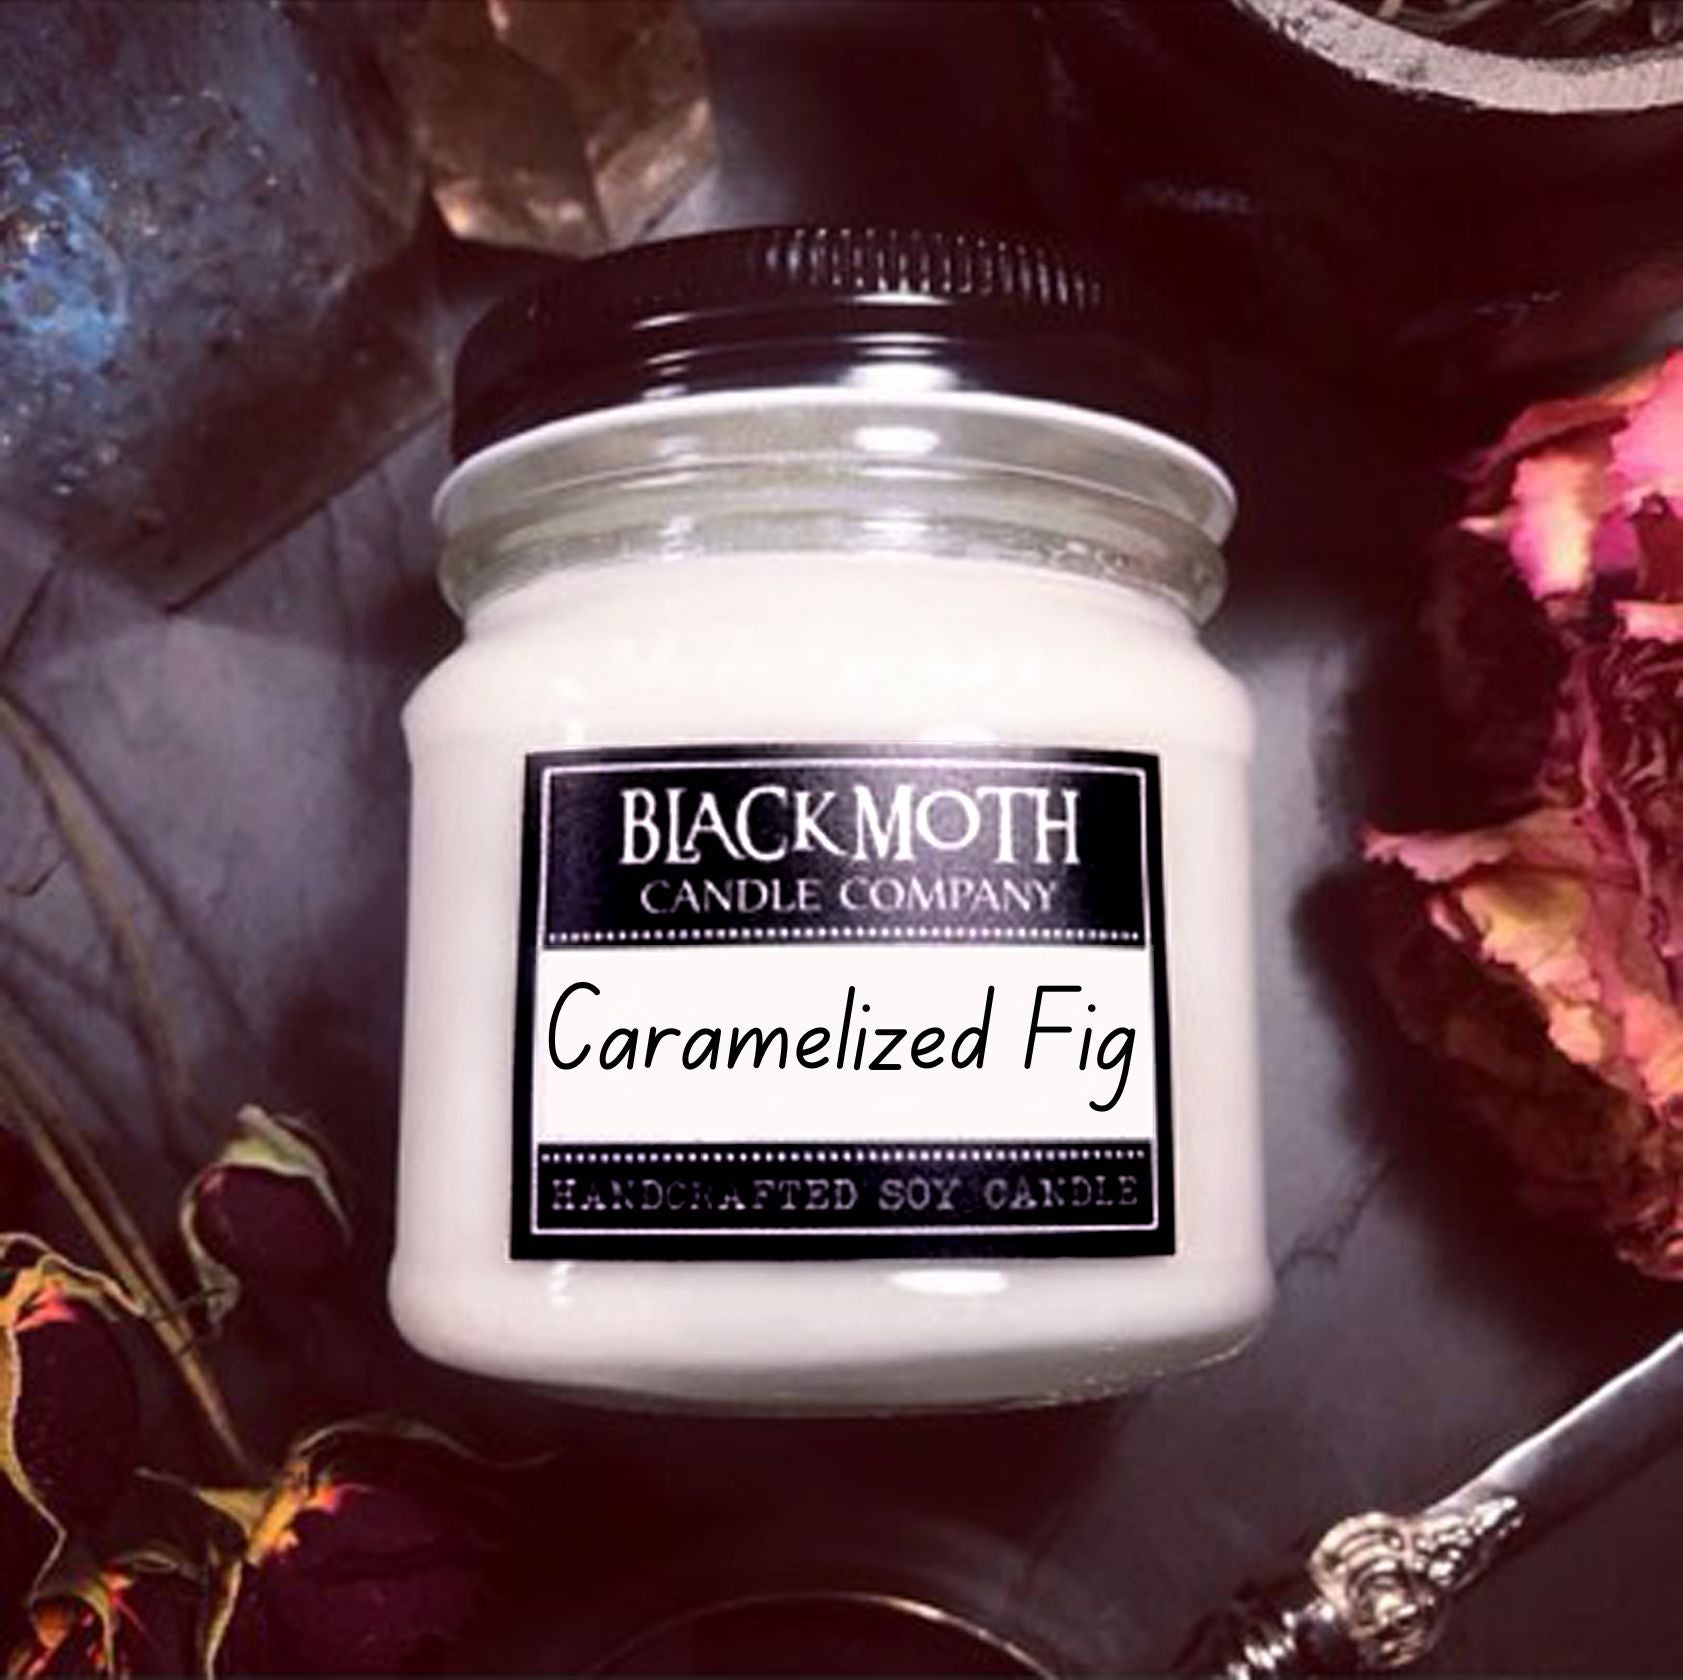 8 oz Caramelized Fig Scented Soy Candle in Mason Jar